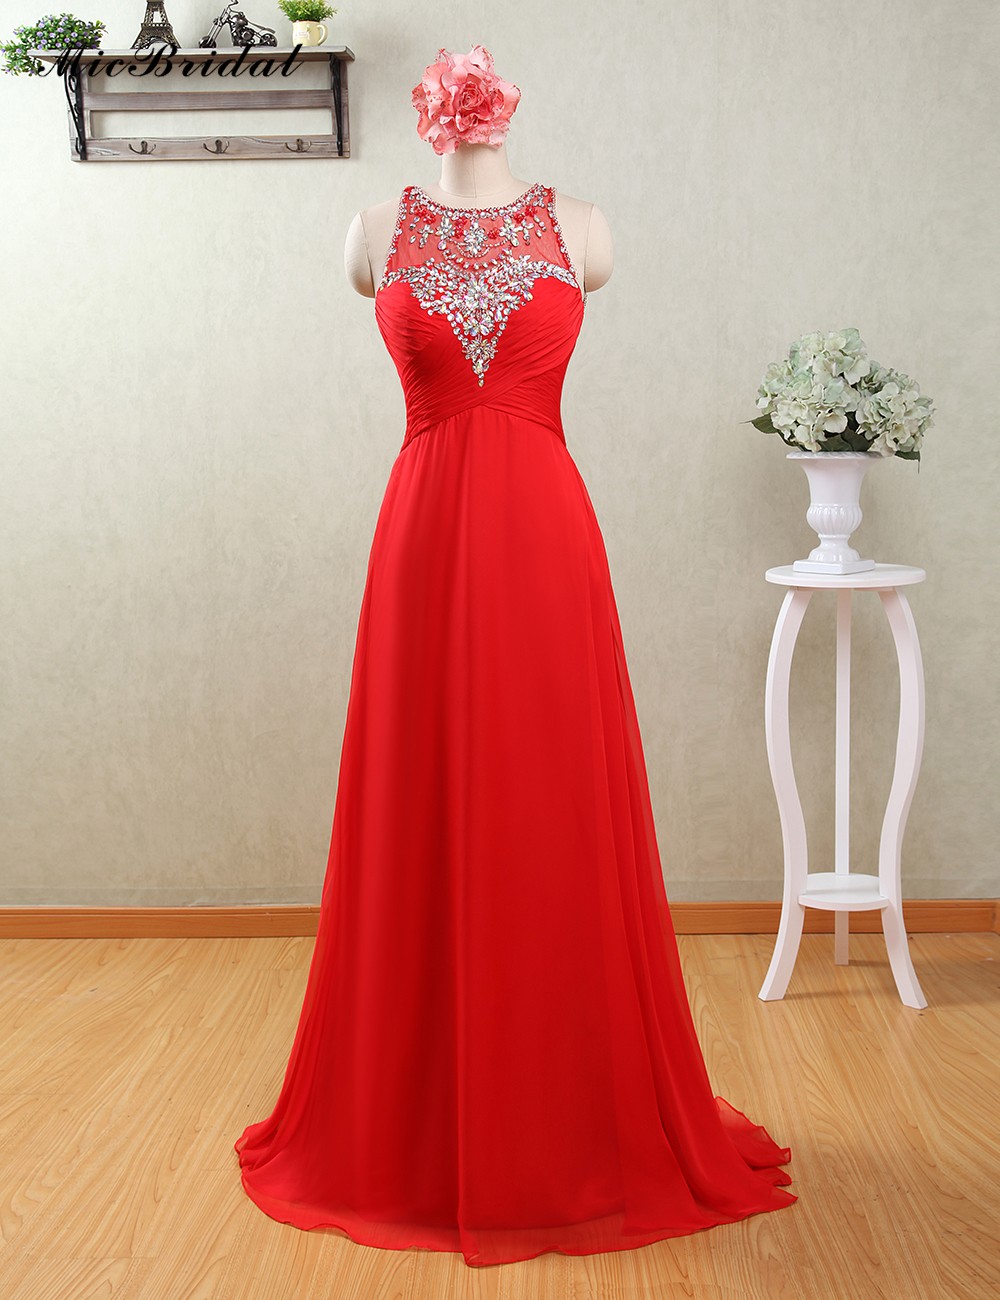 Crystals Scoop Chiffon Red Long Prom Dresses Fast Mx-173 Robe Longue Femme Soiree Mariage